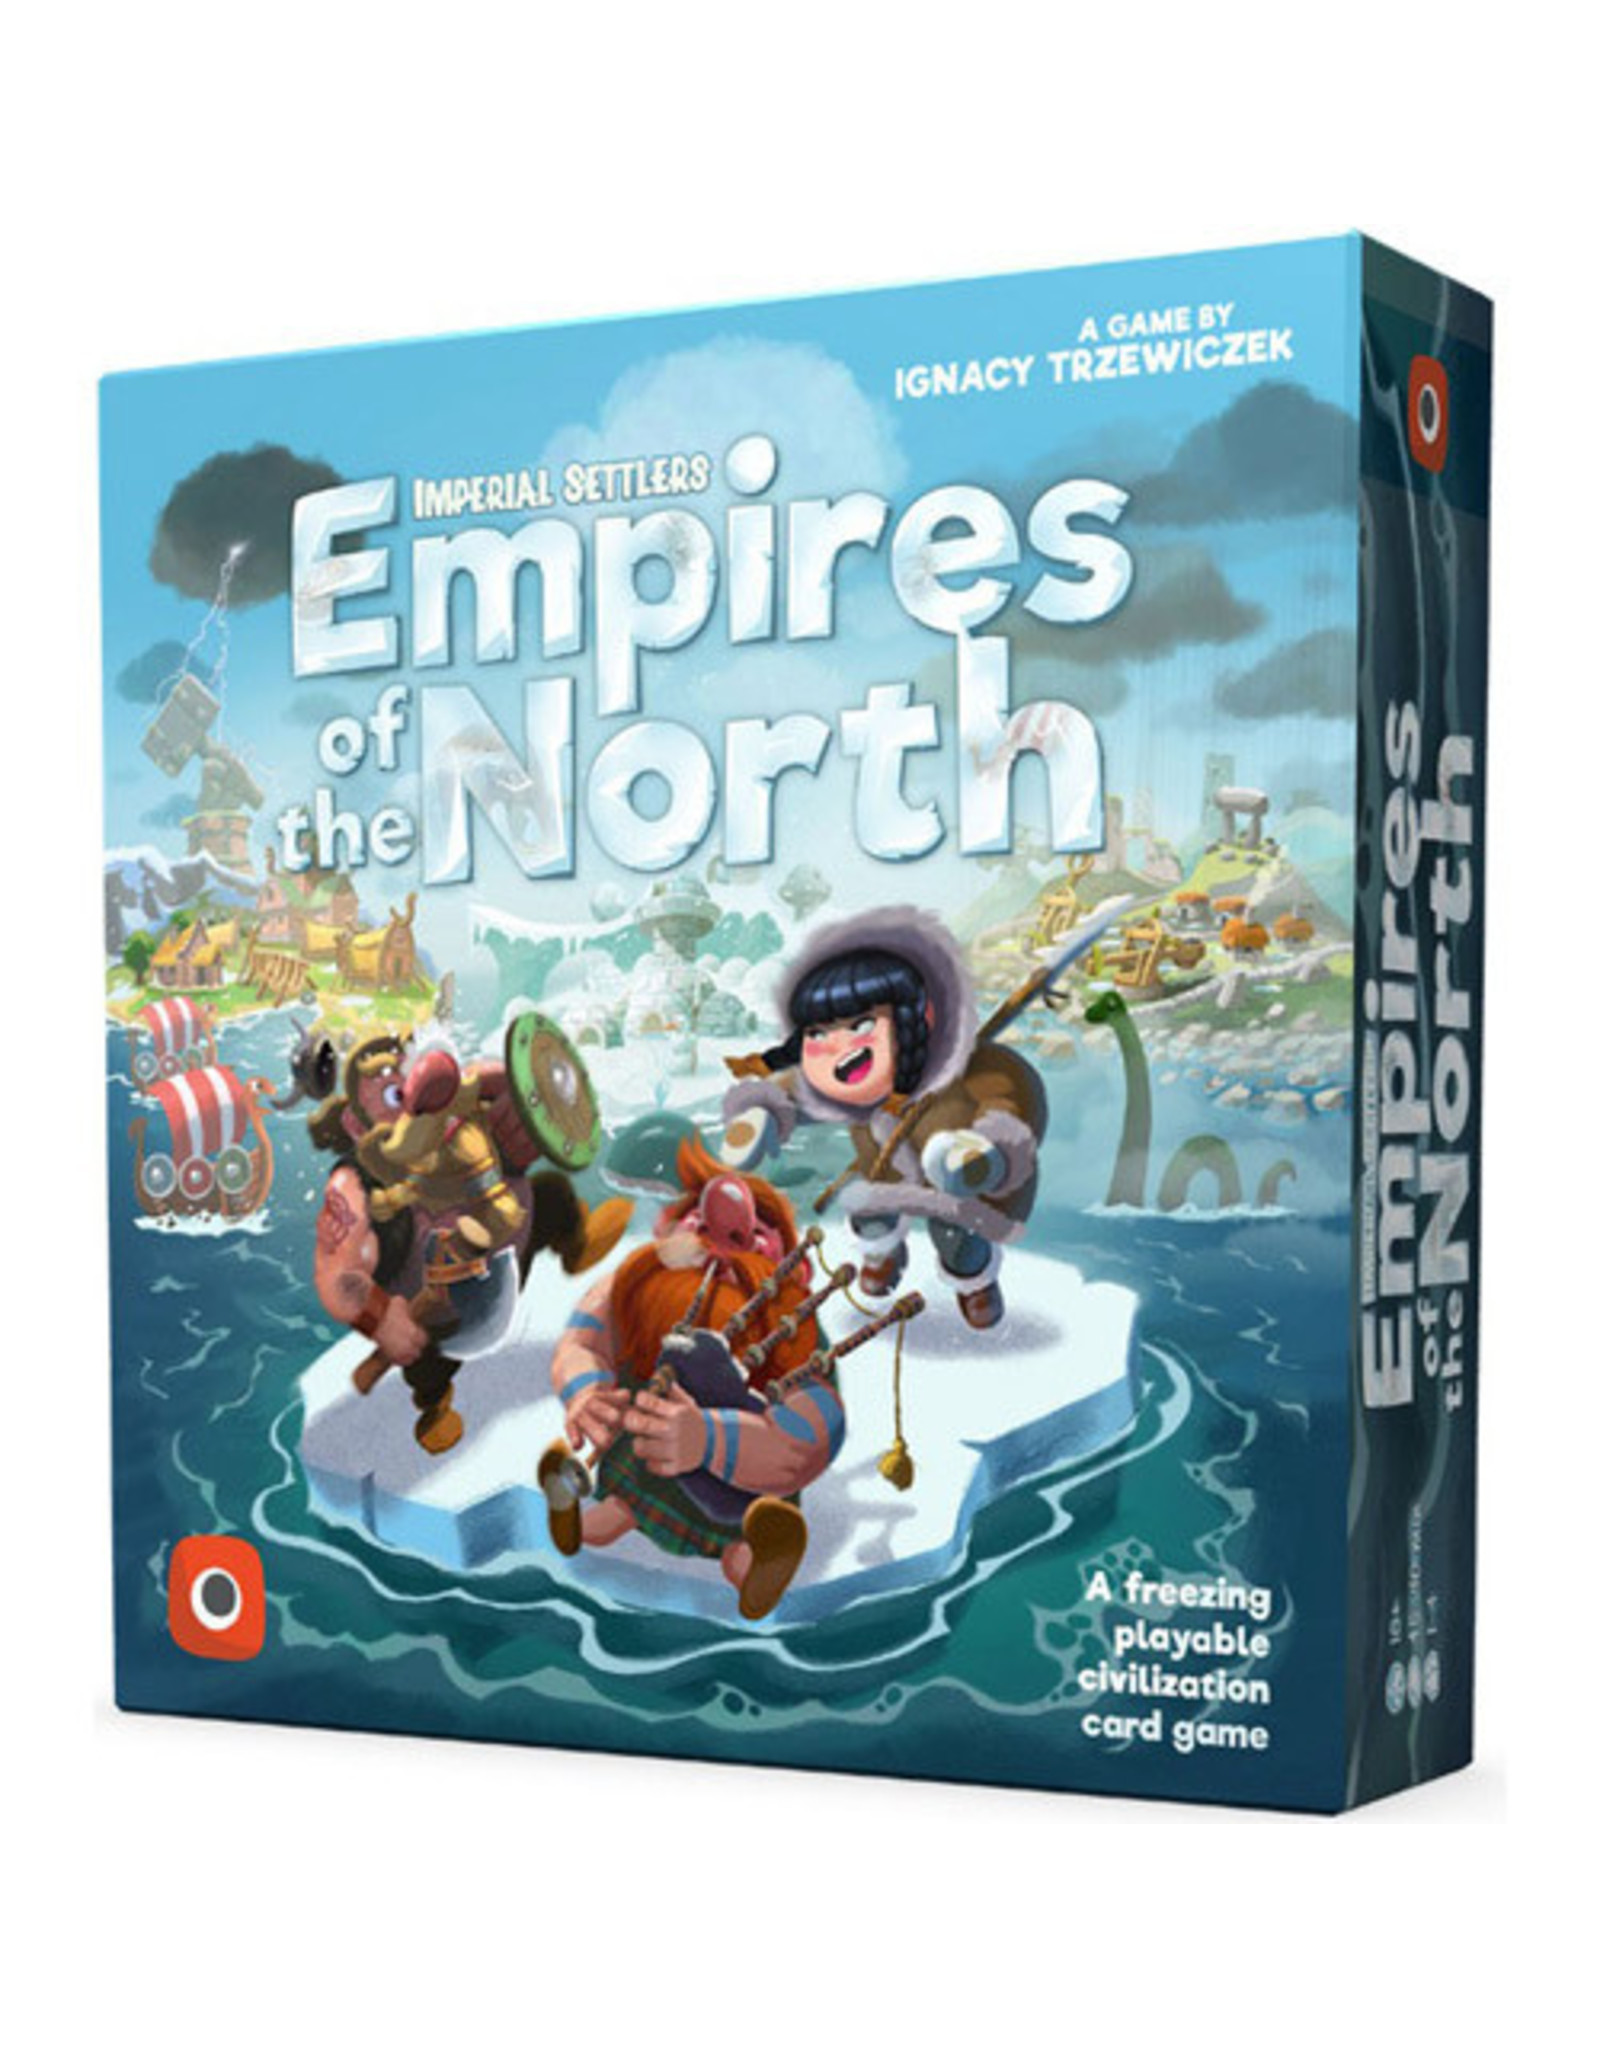 PORTAL GAMES Imperial Settlers: Empires of the North